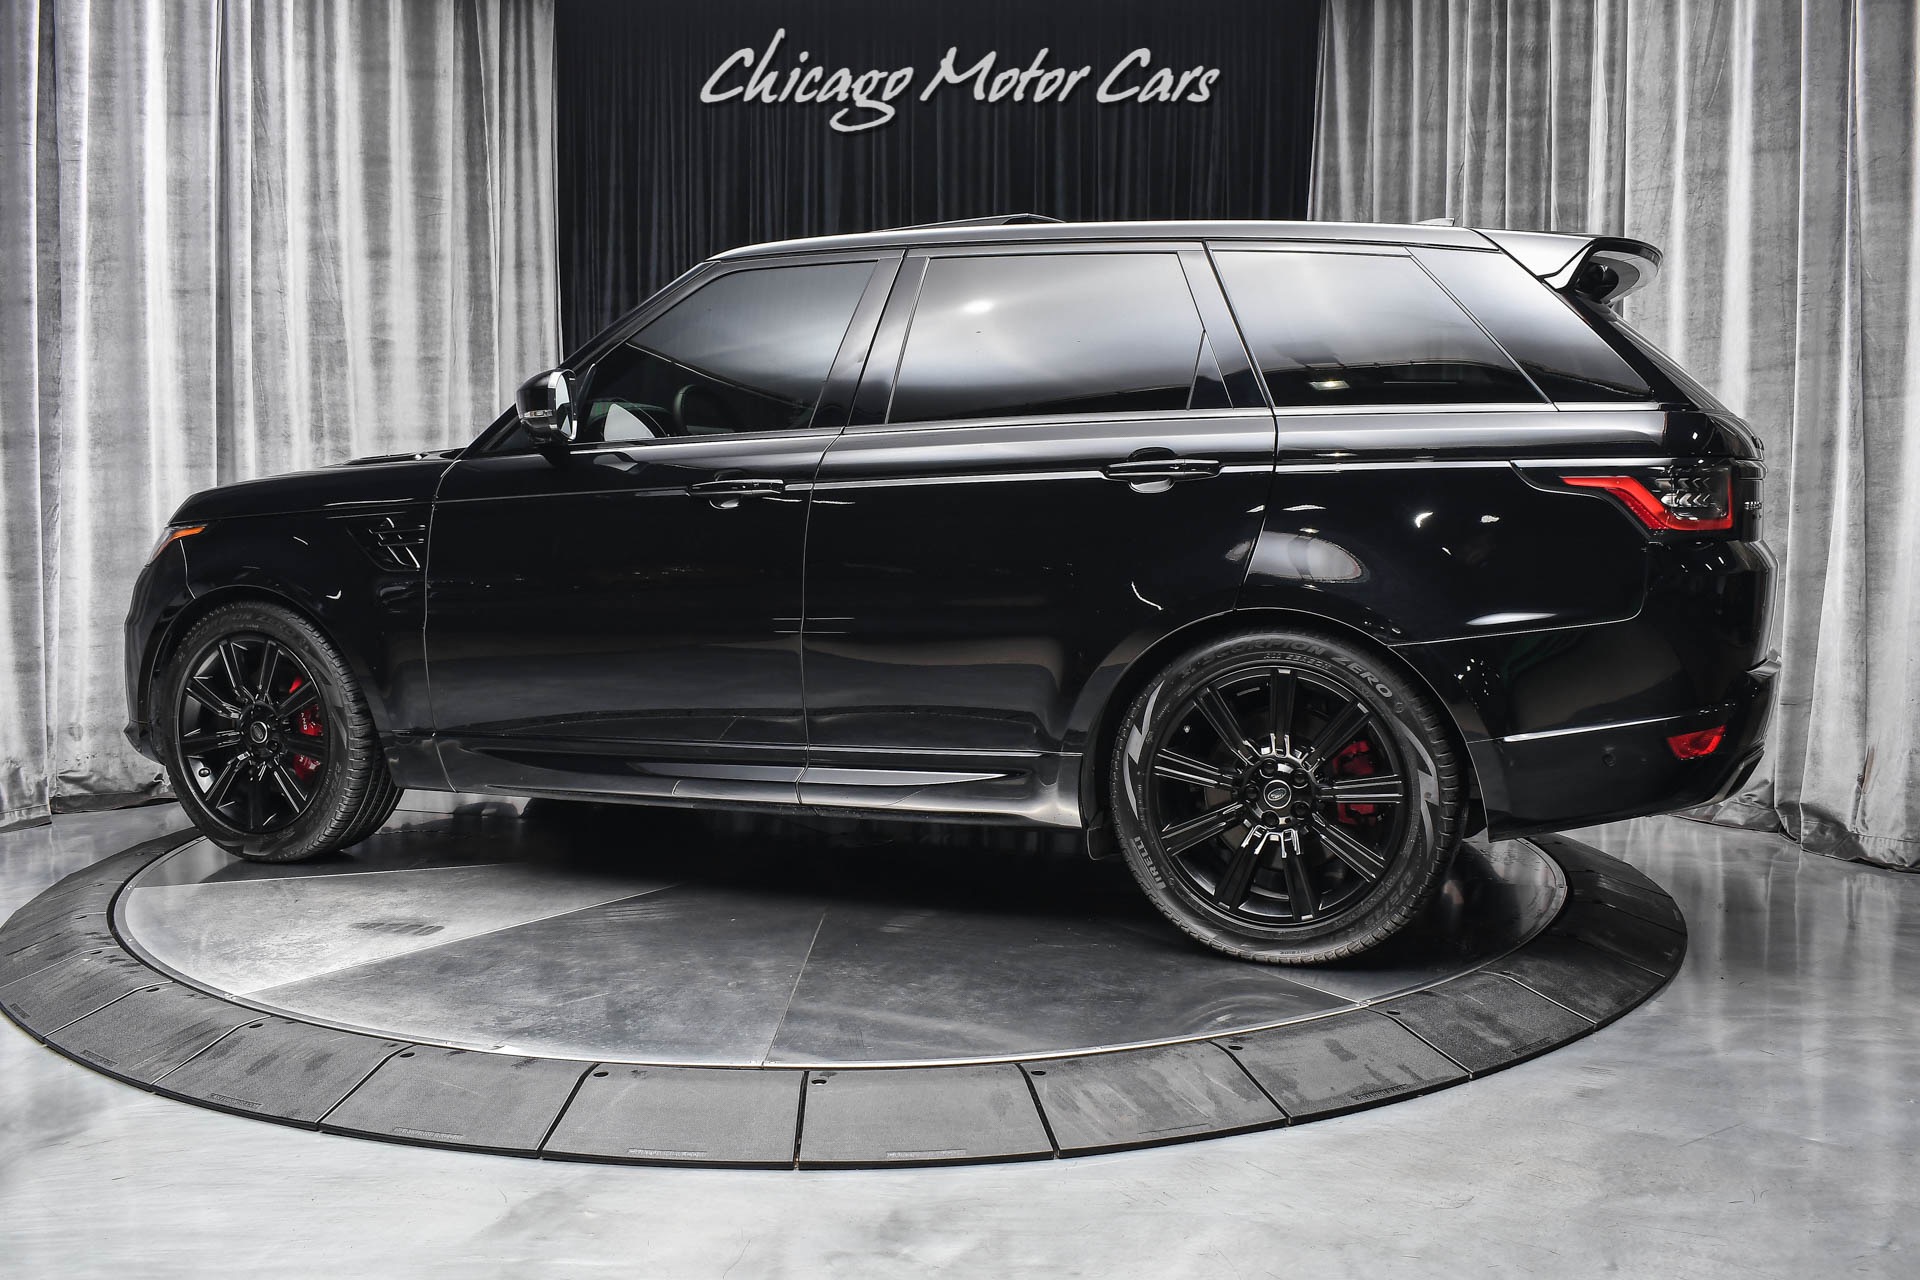 Used 2020 Land Rover Range Rover Sport P525 HSE Dynamic Pack Vision Assist! LOW Miles! For (Special Pricing) | Chicago Motor Cars Stock #17750